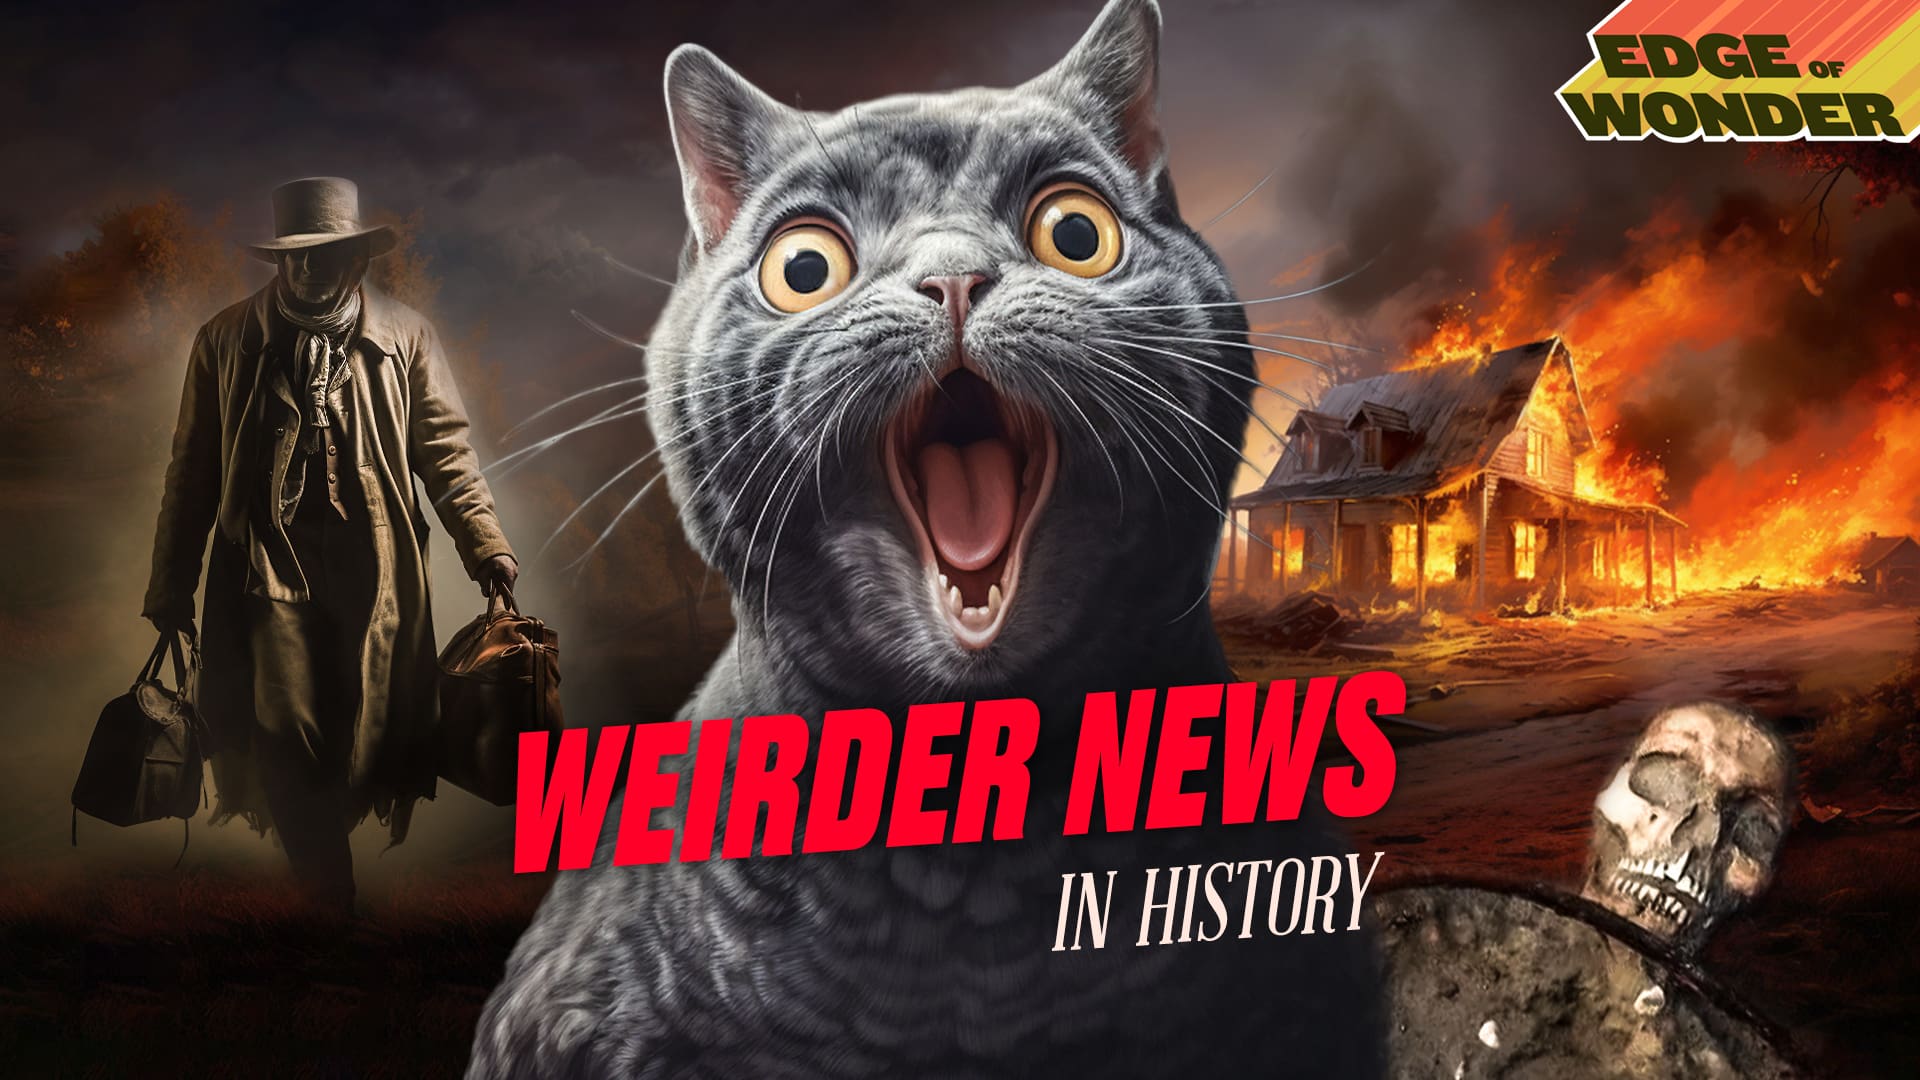 Beyond the Grave & Other Weirdest News in History [Live]